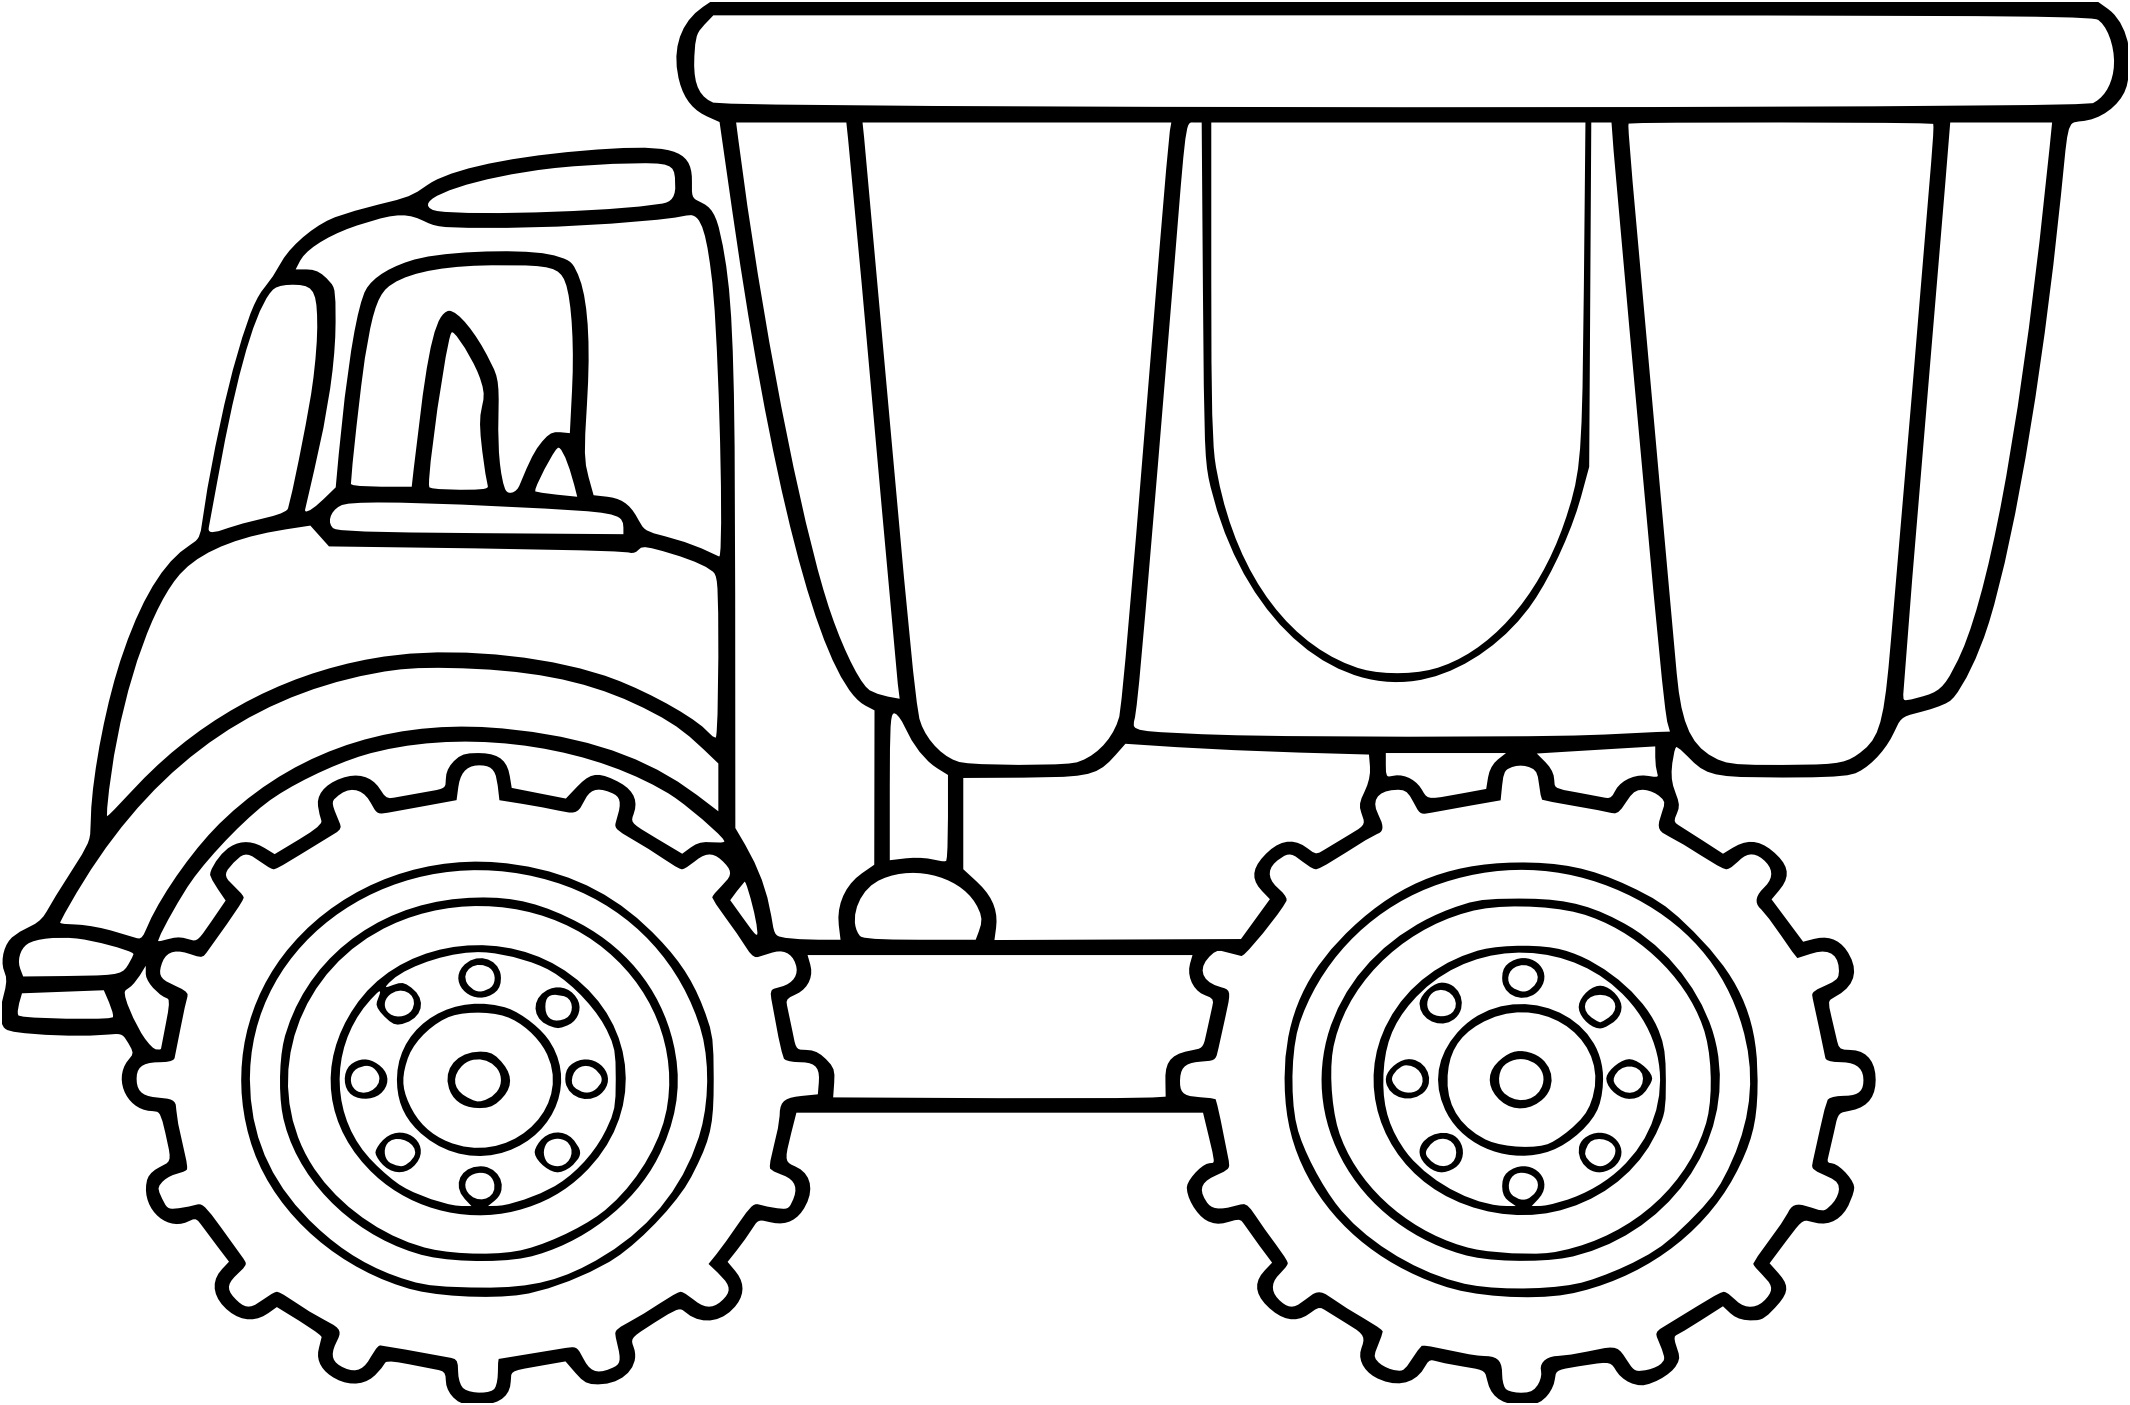 coloriage camion benne